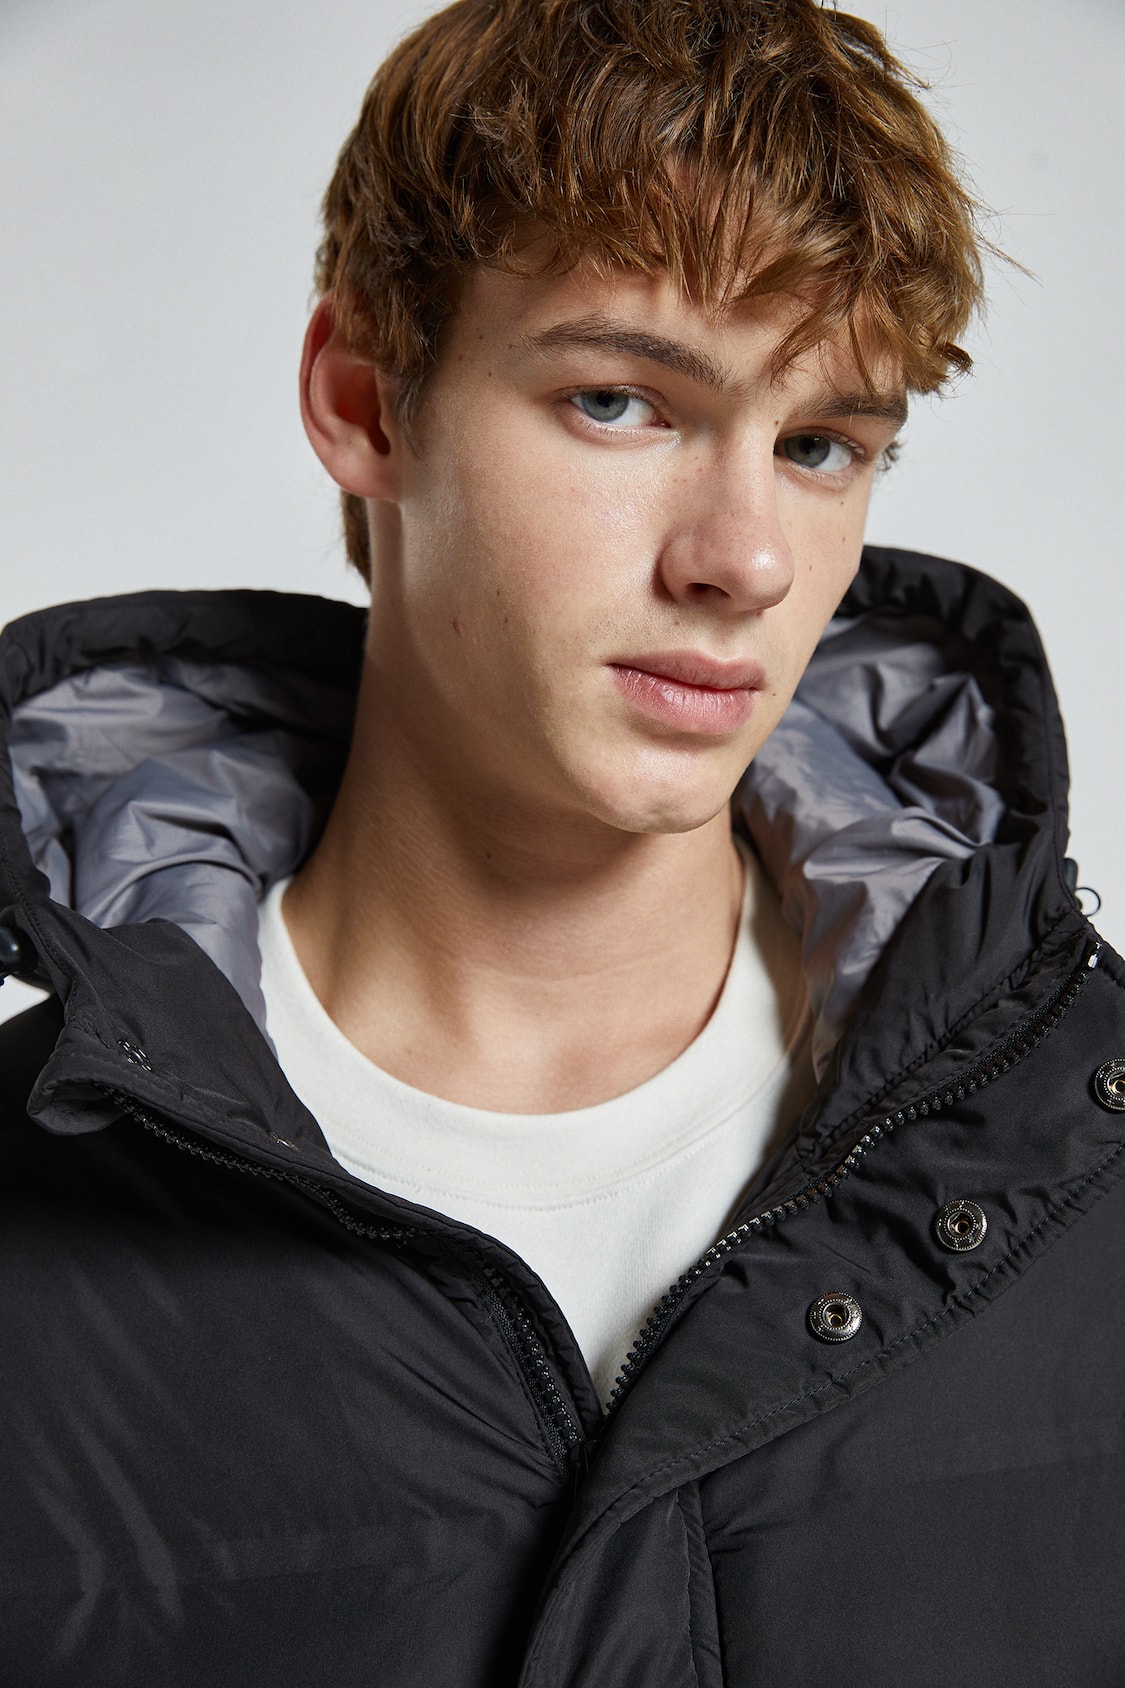 puffer jacket features